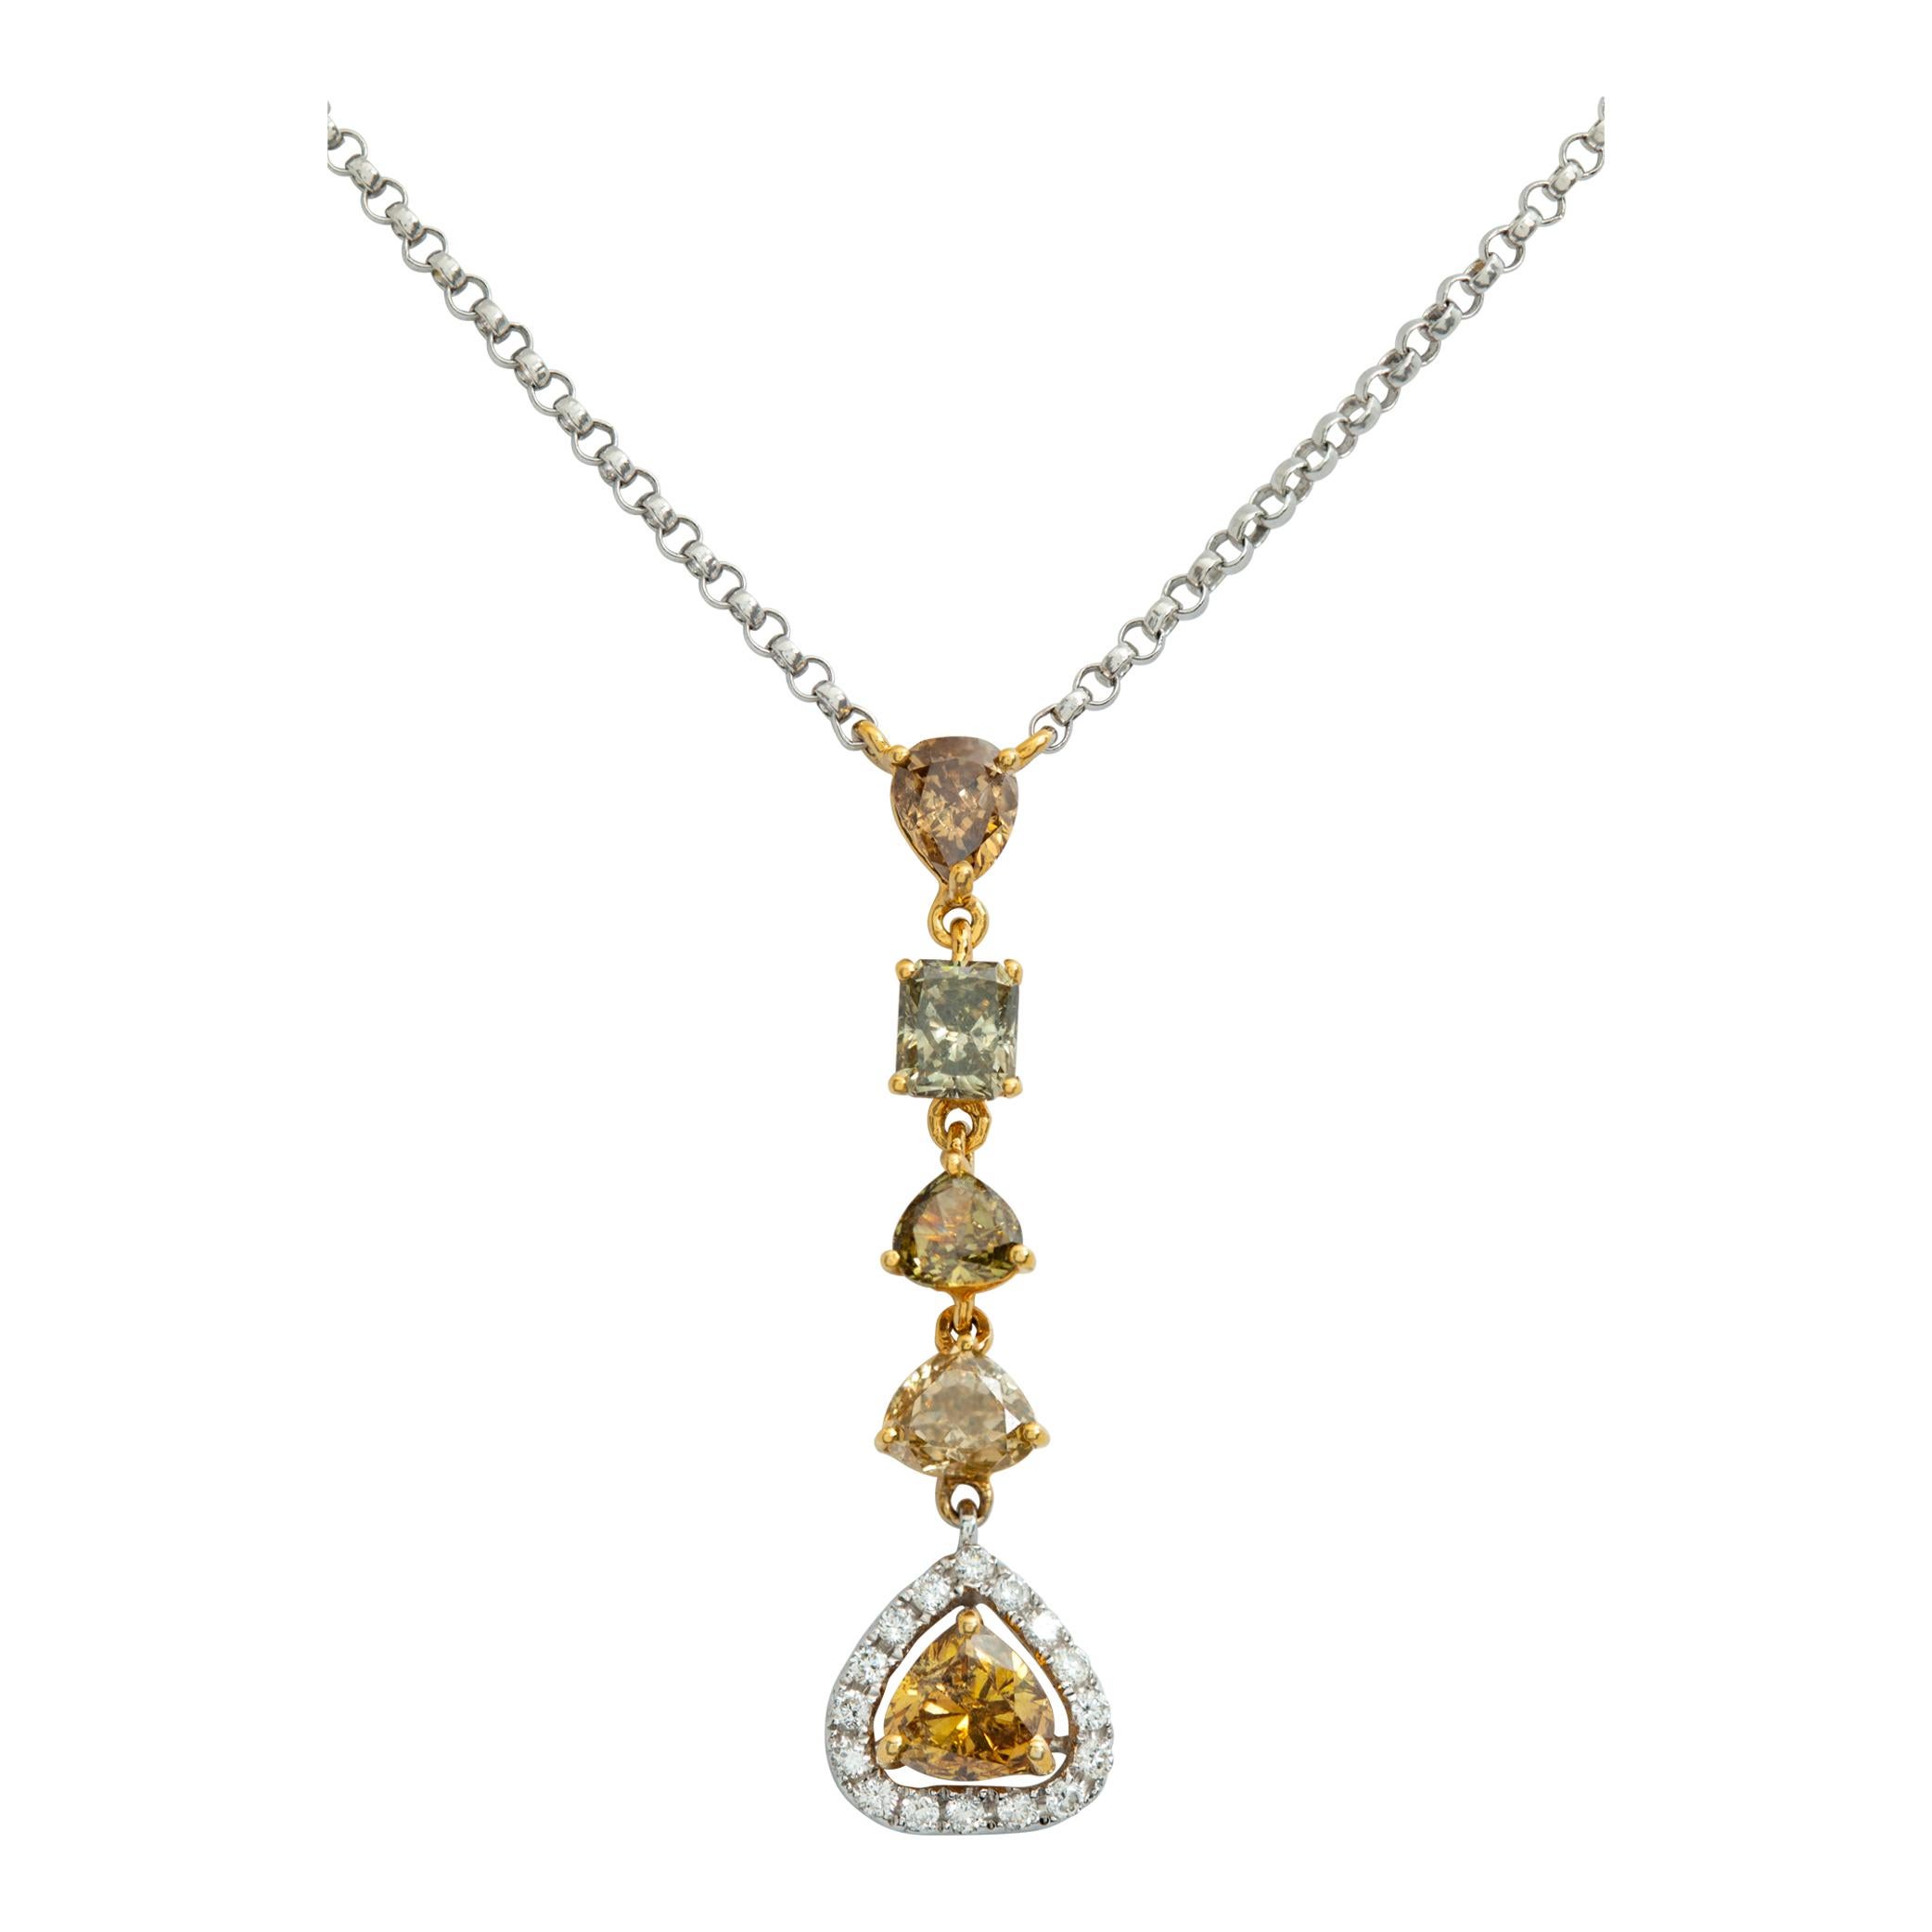 Diamond necklace in 18k white and yellow gold with 1.85 carats in fancy yellow diamonds and 0.22 carat in round brilliant cut diamonds. Length 16 inches, pendant drops 1.2 inches.